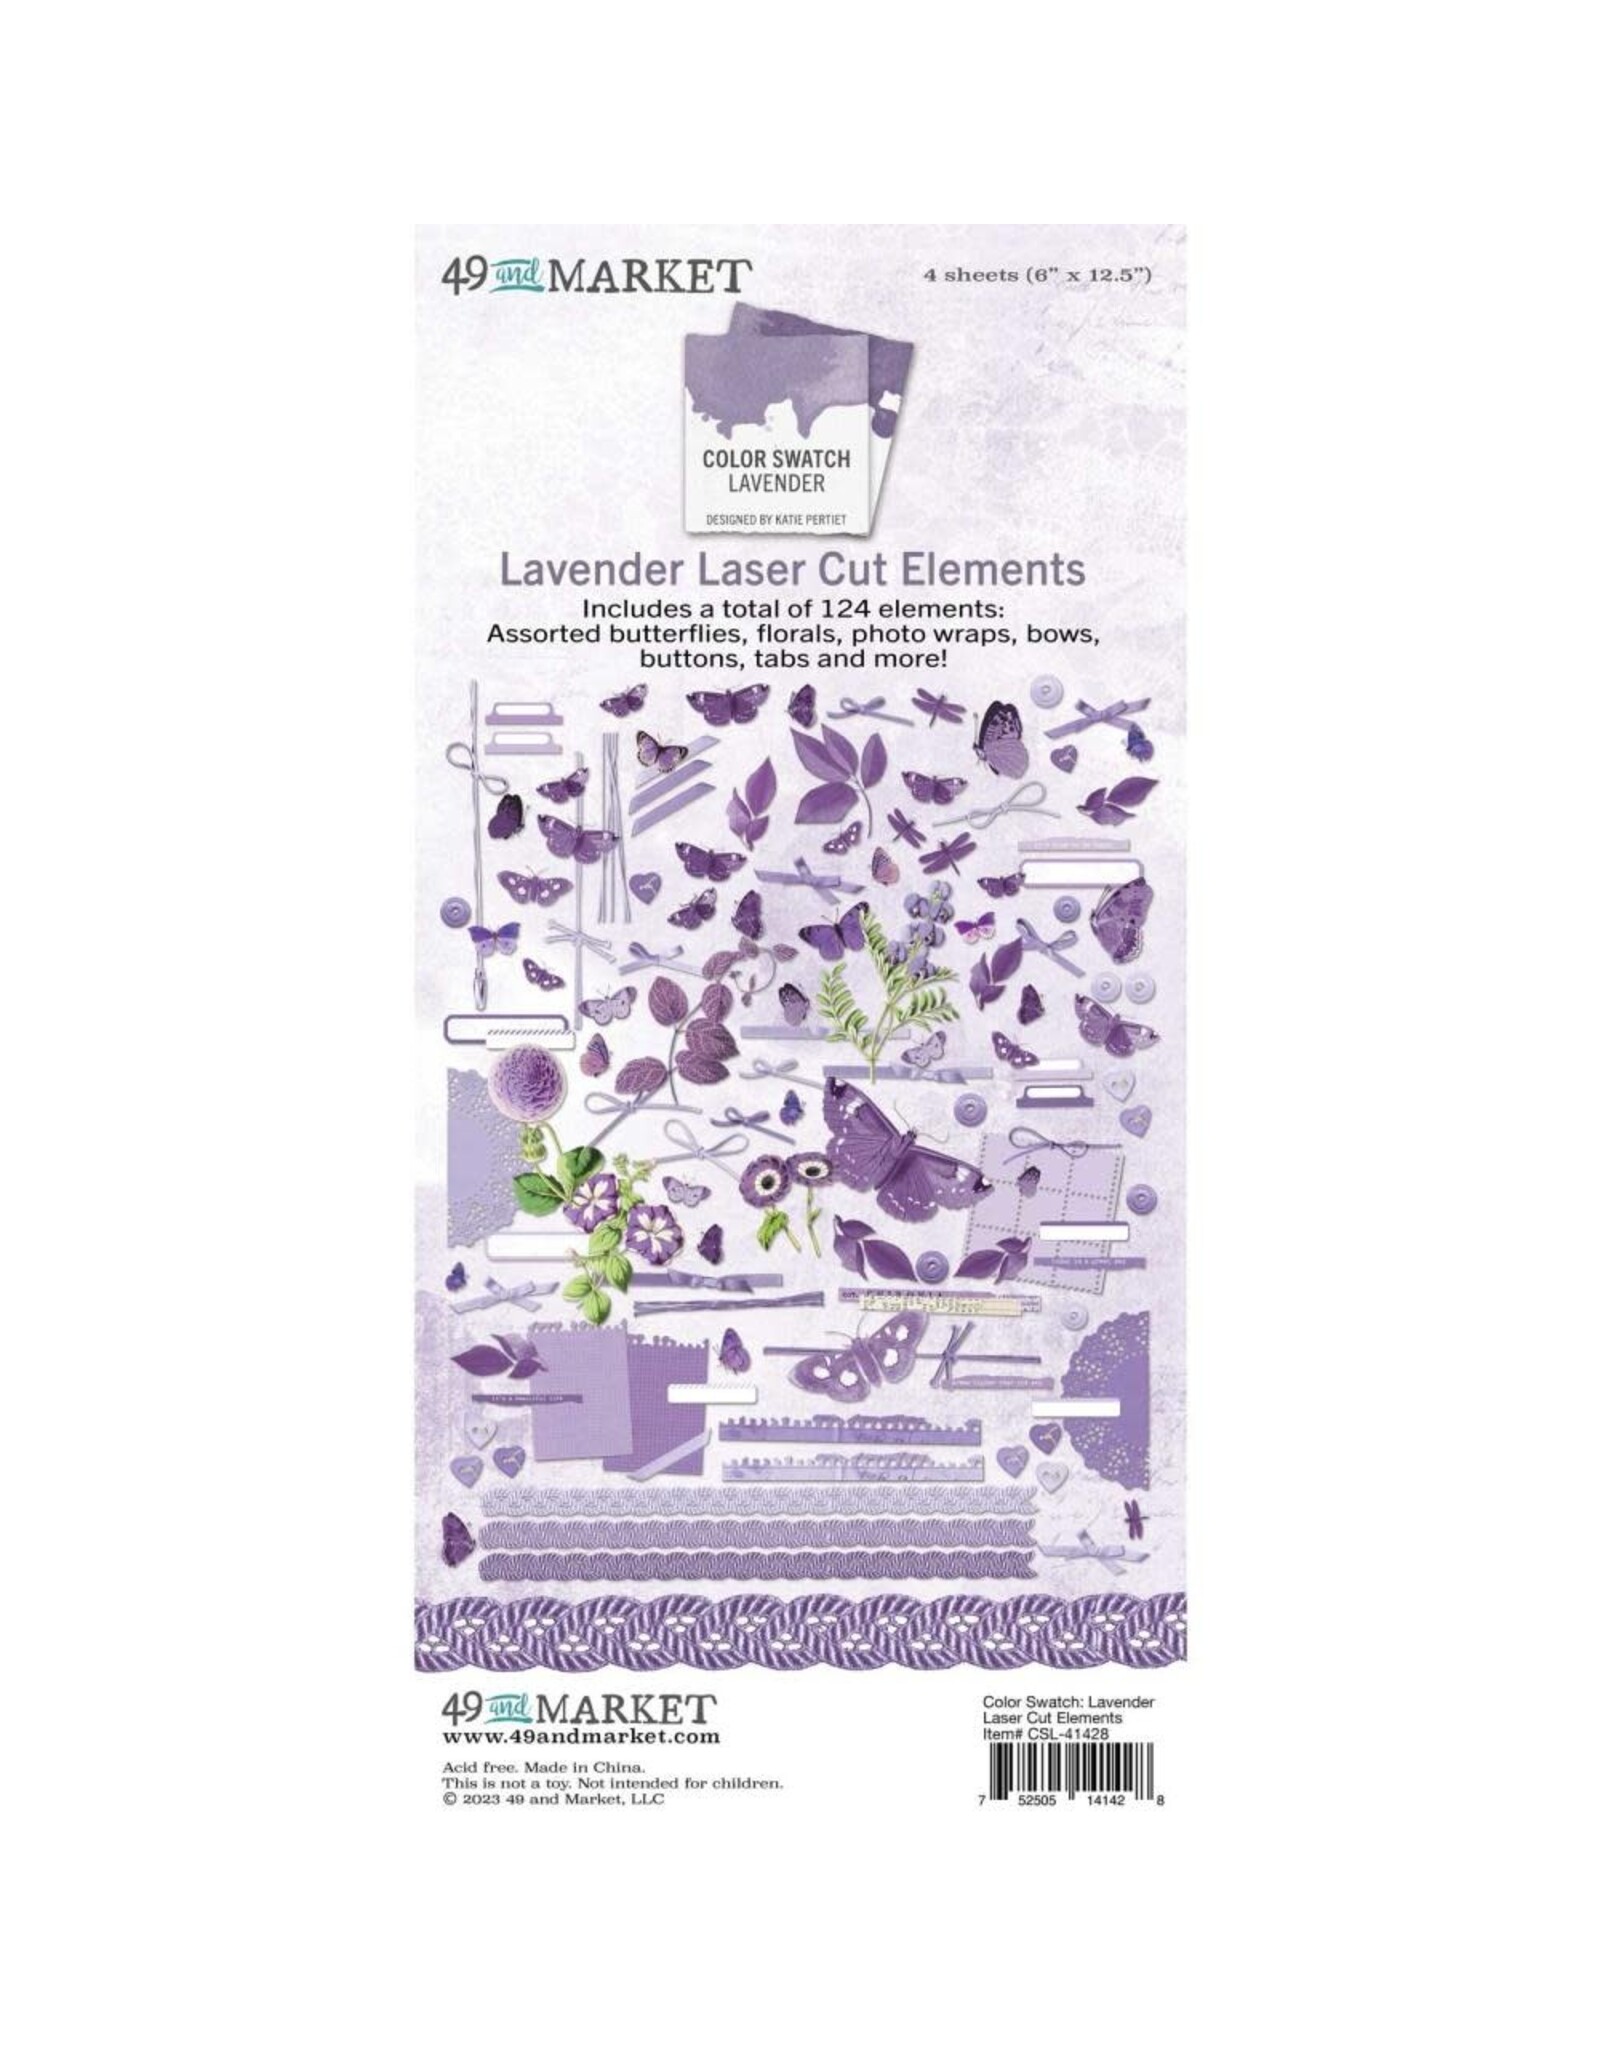 49 AND MARKET 49 AND MARKET COLOR SWATCH LAVENDER 6x12 LASER CUT ELEMENTS  124/PK